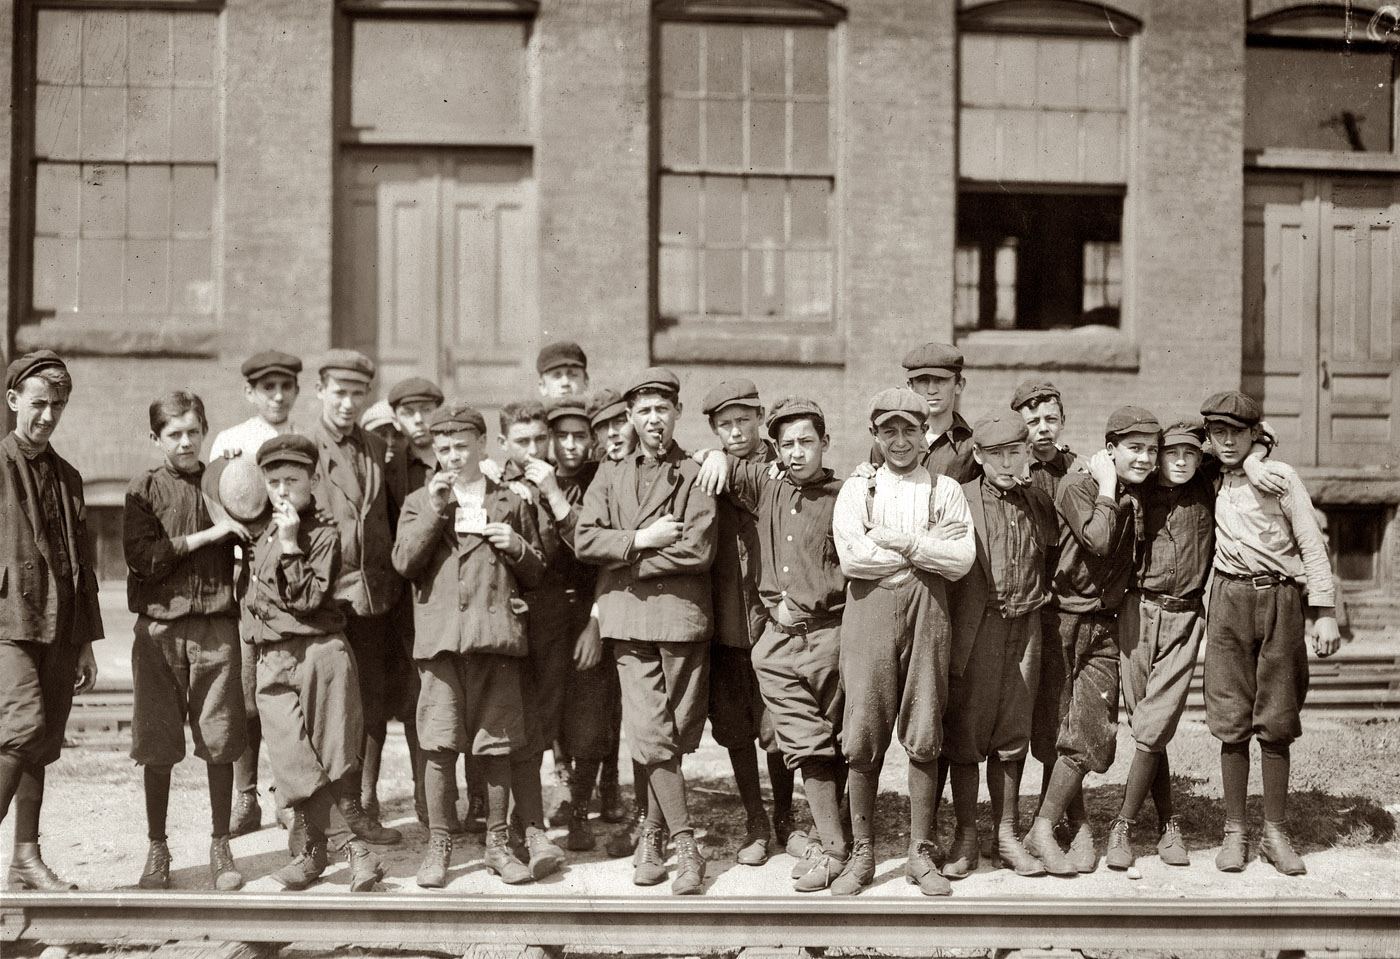 September 1911. Group in front of Indian Orchard Mfg. Co. Indian Orchard, Massachusetts. September 1911. View full size. Photo by Lewis Wickes Hine.